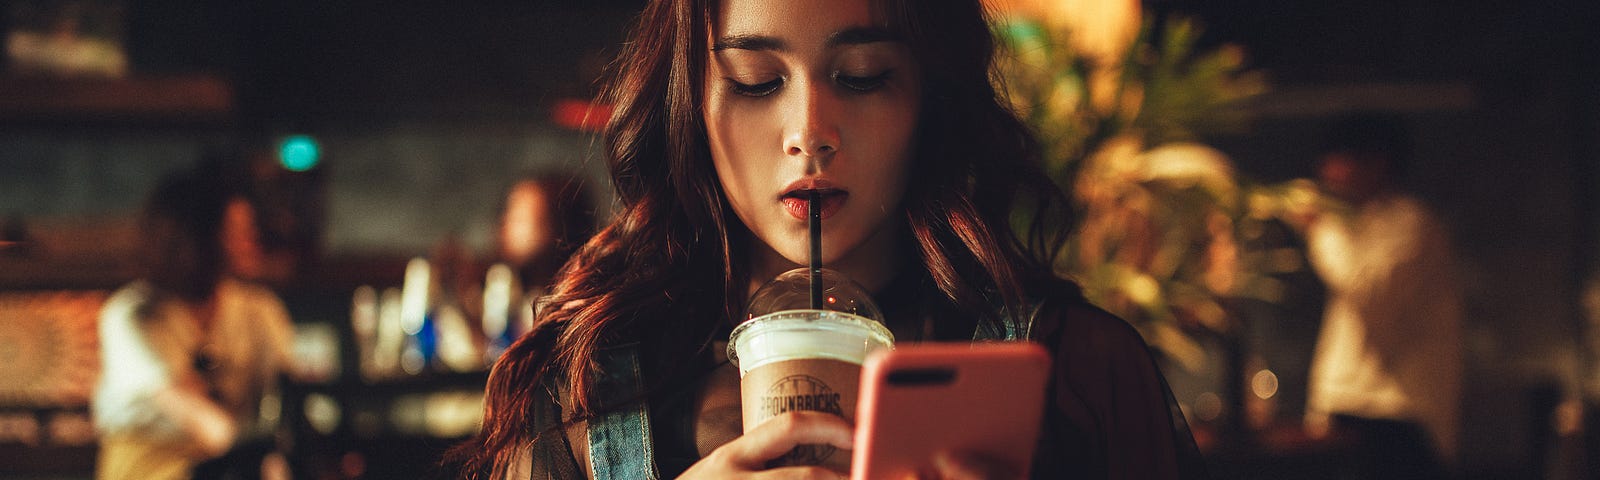 A young woman in a coffee shop looks at her phone while sipping a drink